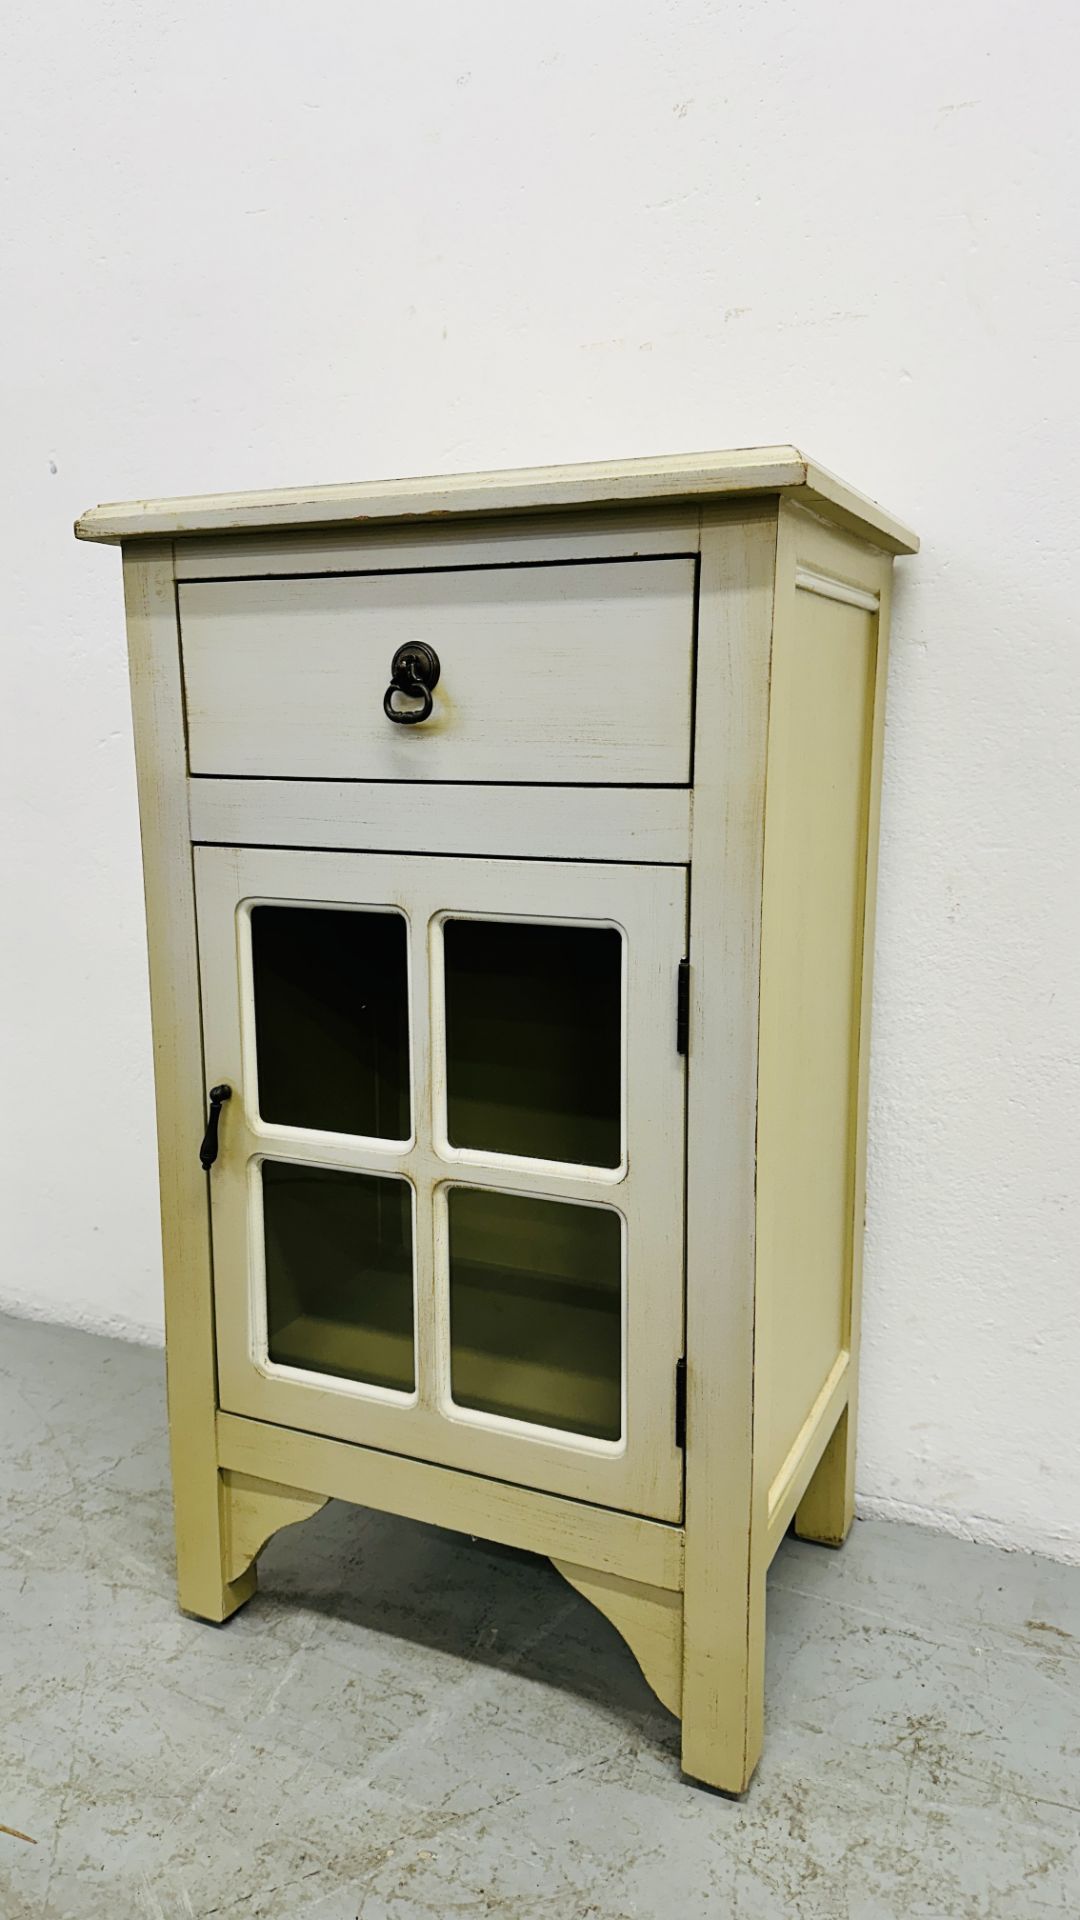 VINTAGE TYPE SINGLE DOOR CABINET WITH DRAWER ABOVE - W 46CM X D 33CM X H 78CM. - Image 2 of 7